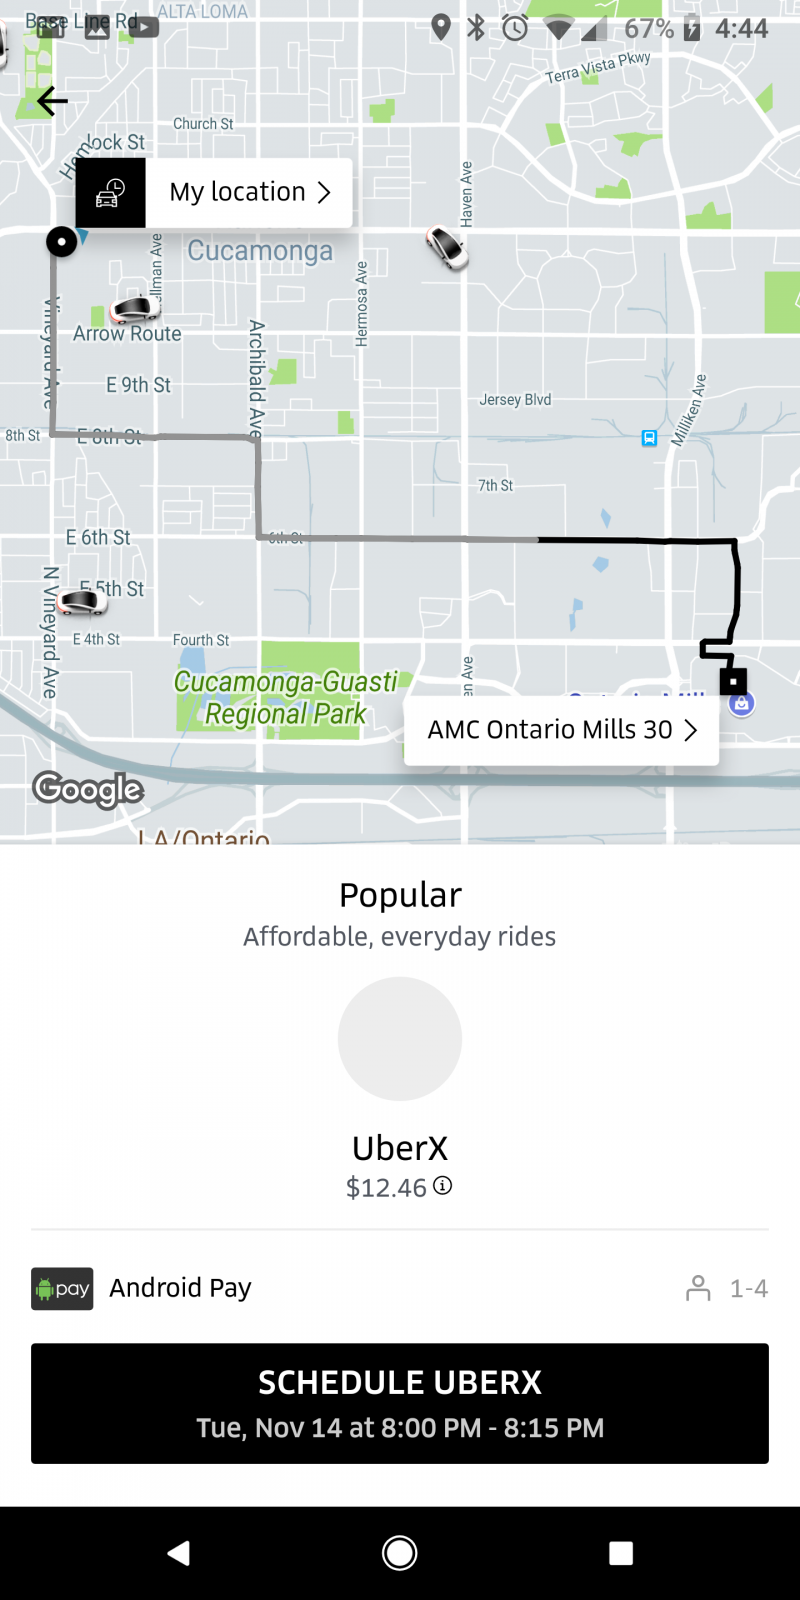 Uber locks in fares if you schedule rides far enough ahead of time - Phandroid